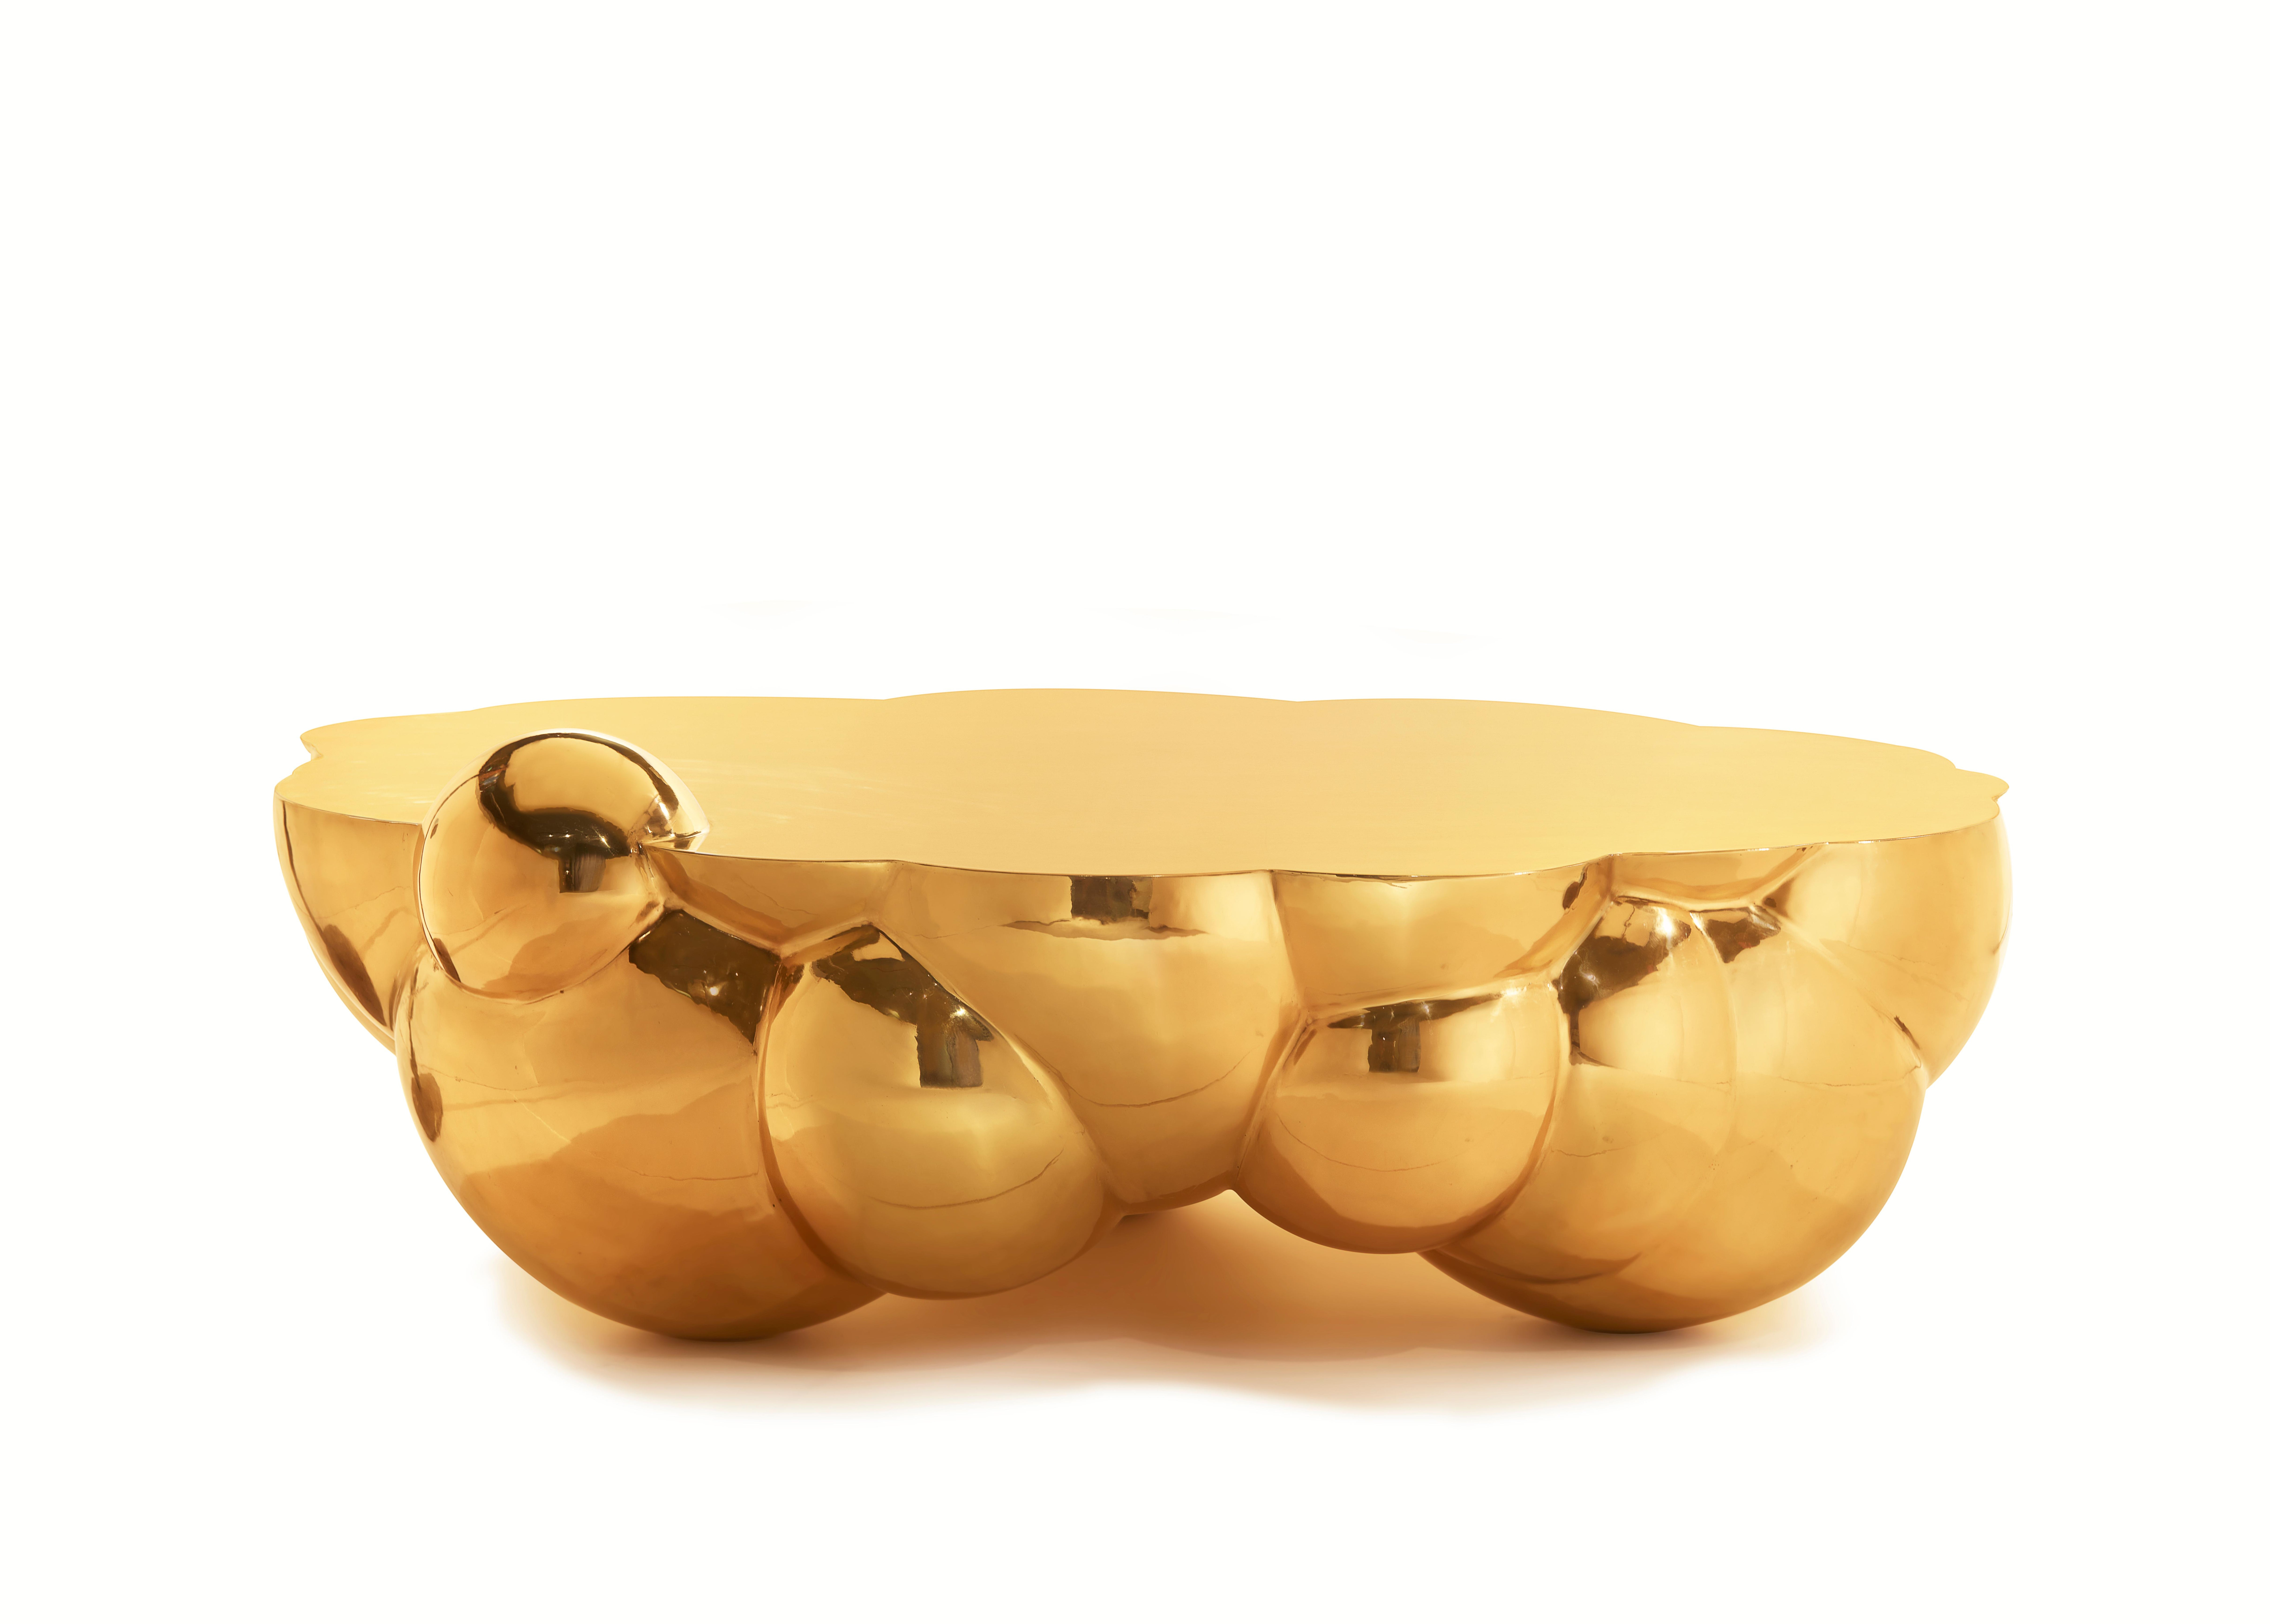 Wolk coffee table in Brass is a slice of a cloud crafted in pure brass, fantastical and luxurious. A conversation point in your living space!

Richard Hutten’s Wolk collection for Scarlet Splendour is inspired by beautiful, rare mammatus clouds.